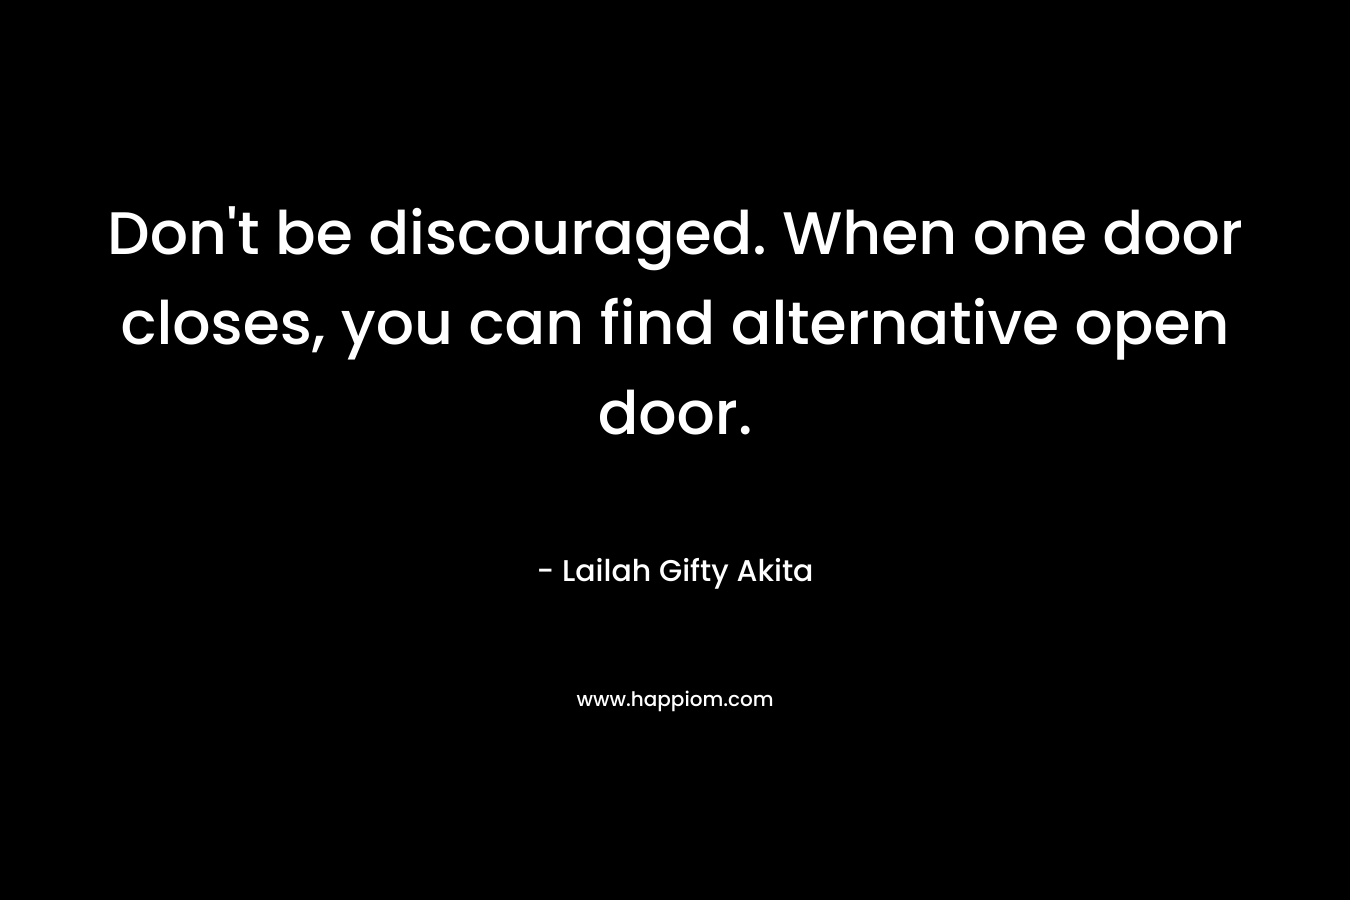 Don’t be discouraged. When one door closes, you can find alternative open door. – Lailah Gifty Akita